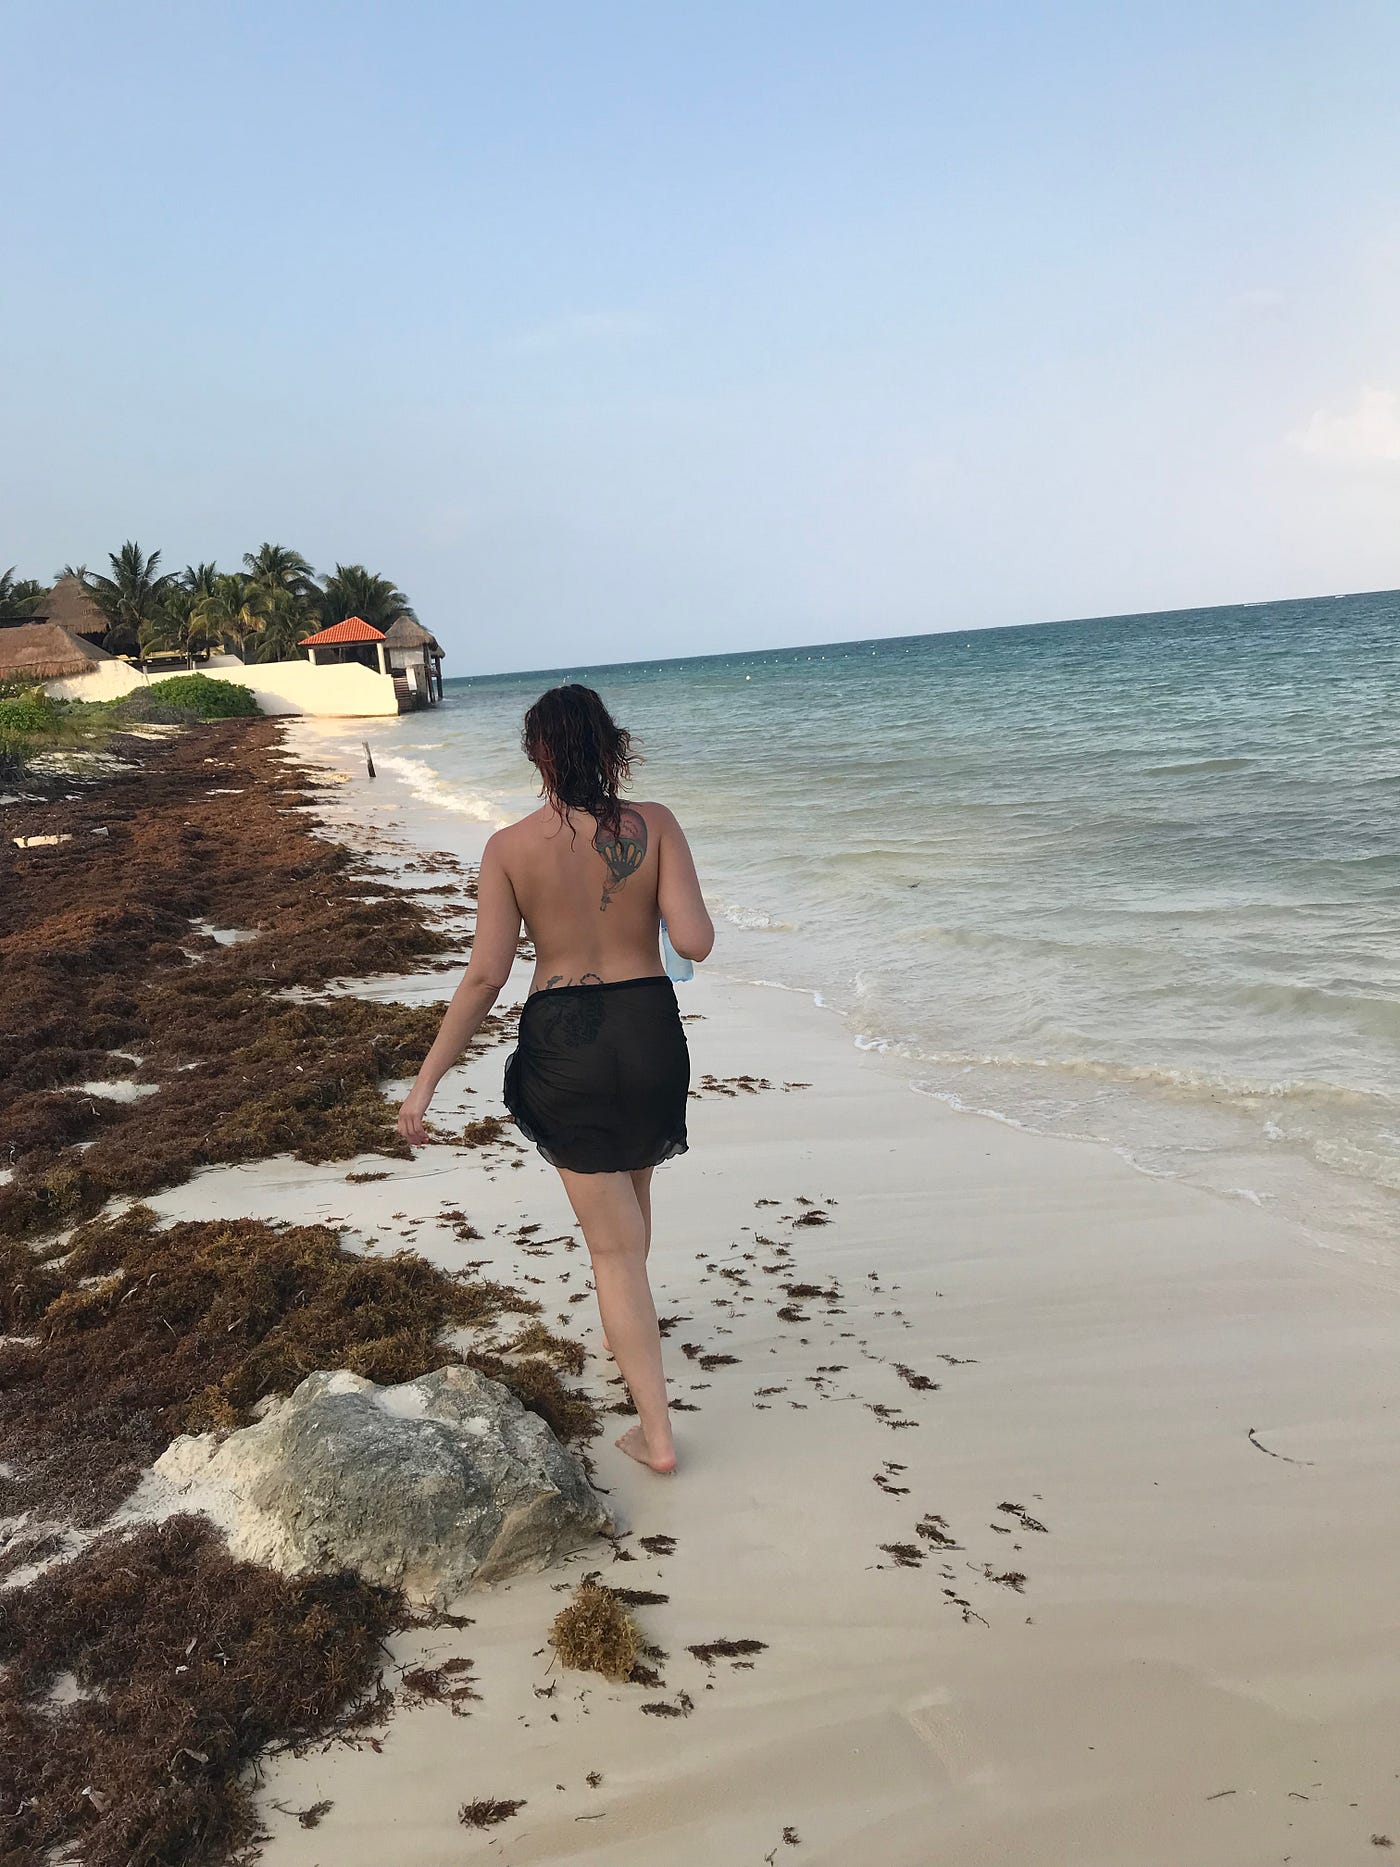 Our First Desire Riviera Maya Trip (April 2019) Day 4 and 5 by Sex Ed for the Modern Bed Medium